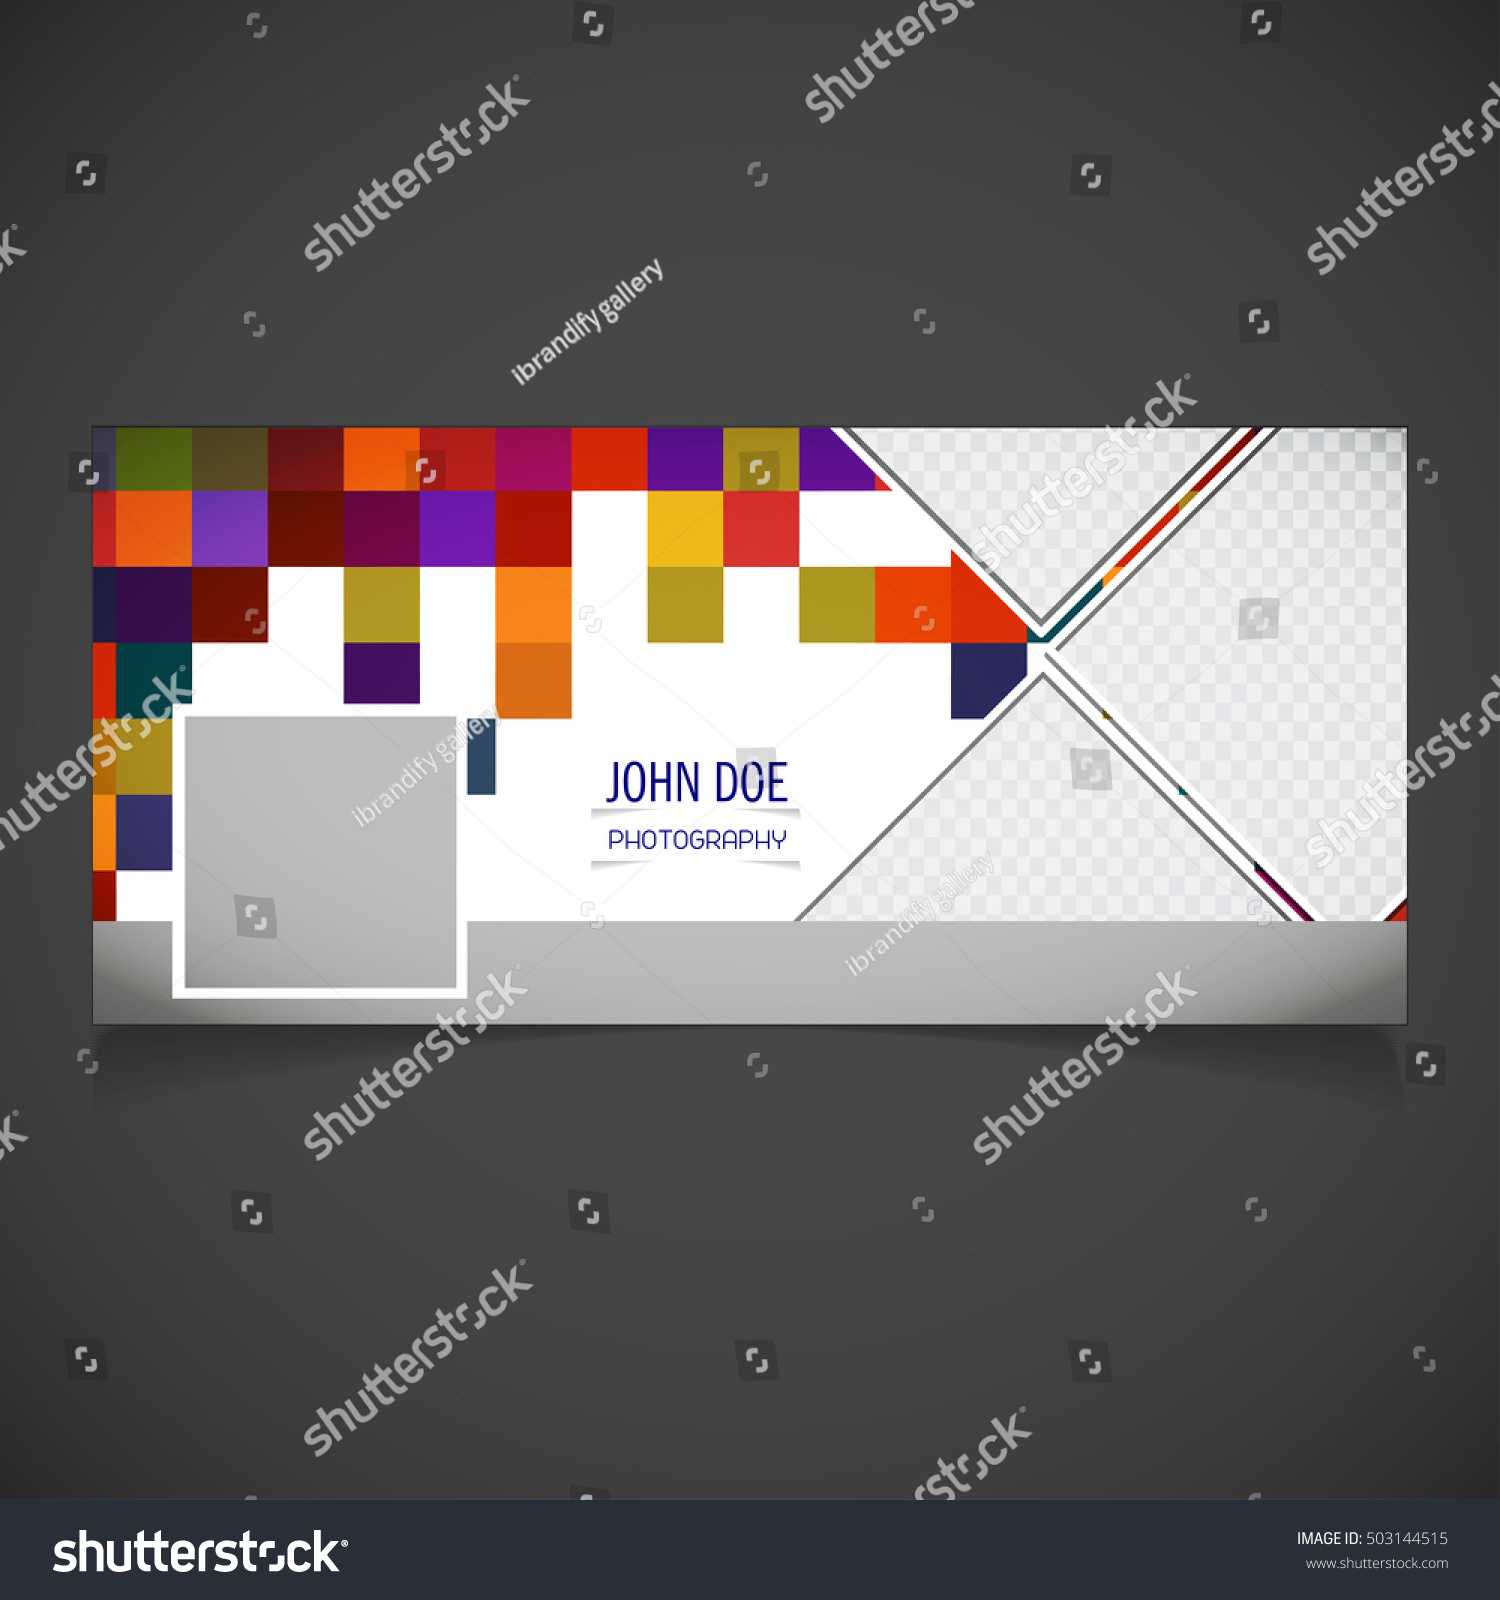 Creative Photography Banner Template Place Image Stock For Photography Banner Template